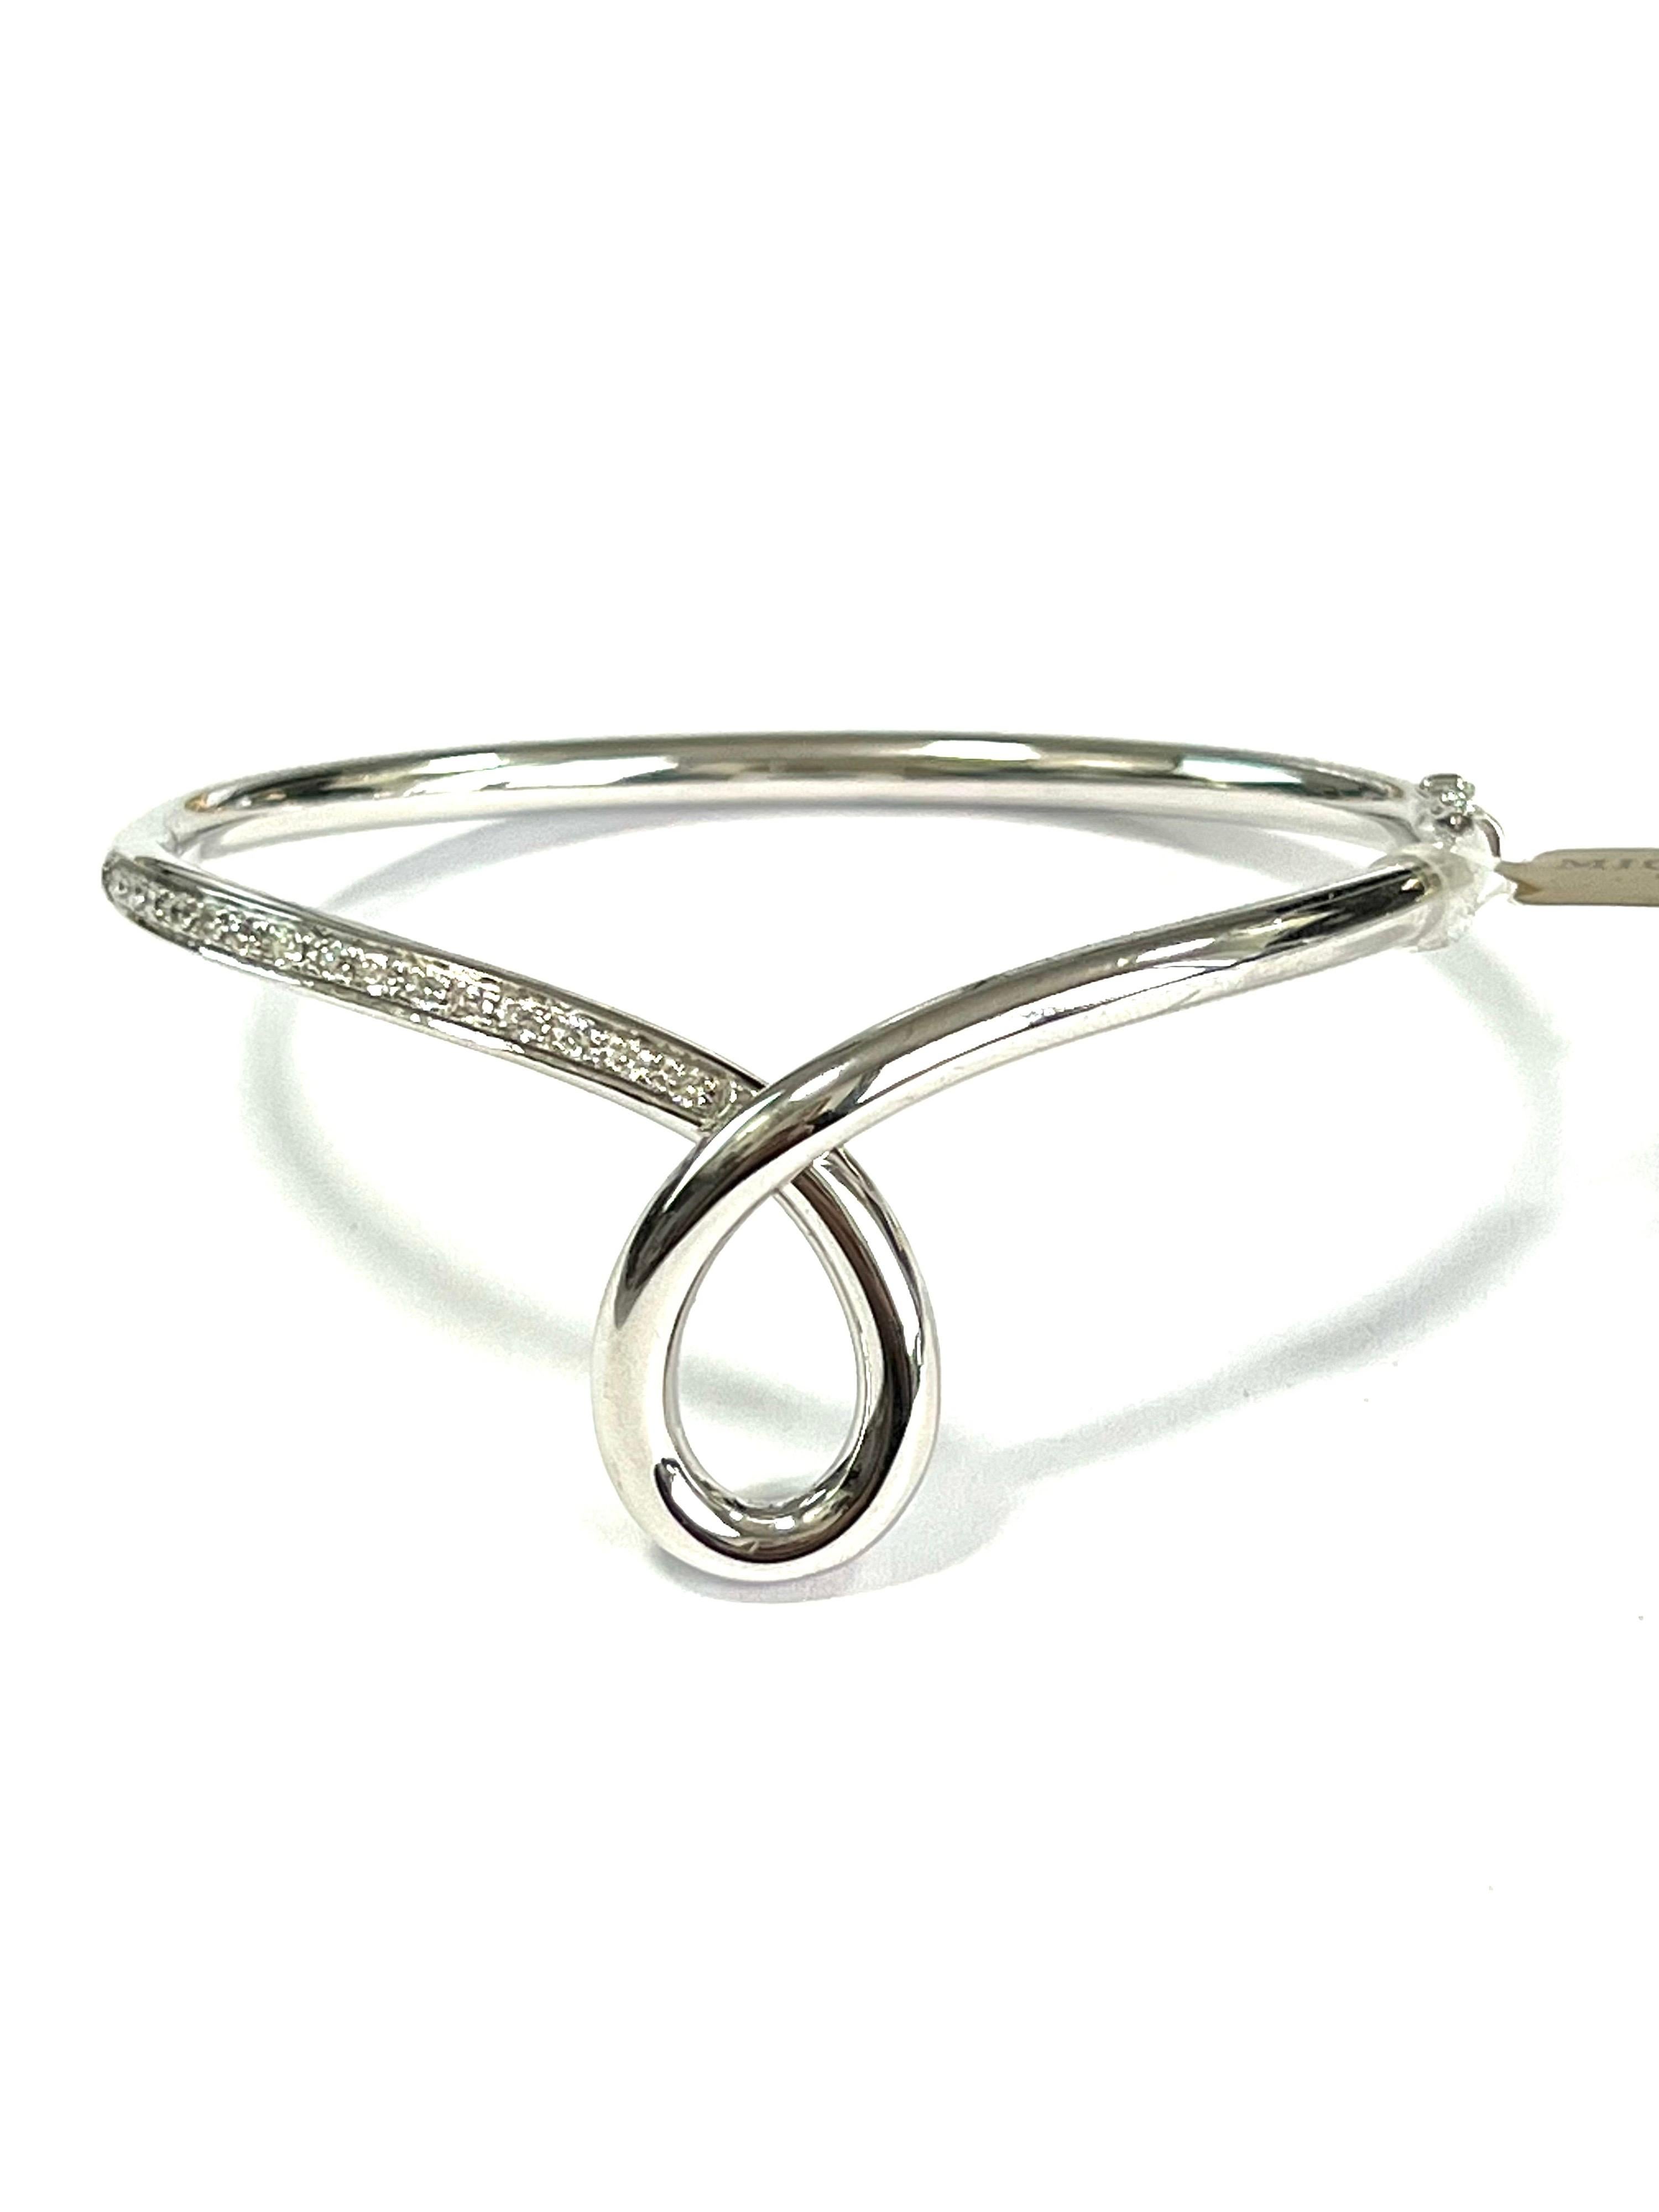 Essence bangle in 18 kt  white gold and white diamonds 
This classic collection in Micheletto tradition

the total weight of the gold is  gr 29.90
the total weight of the white diamonds is ct 0.37 - color GH clarity VVS1

STAMP: 10 MI ITALY 750

The